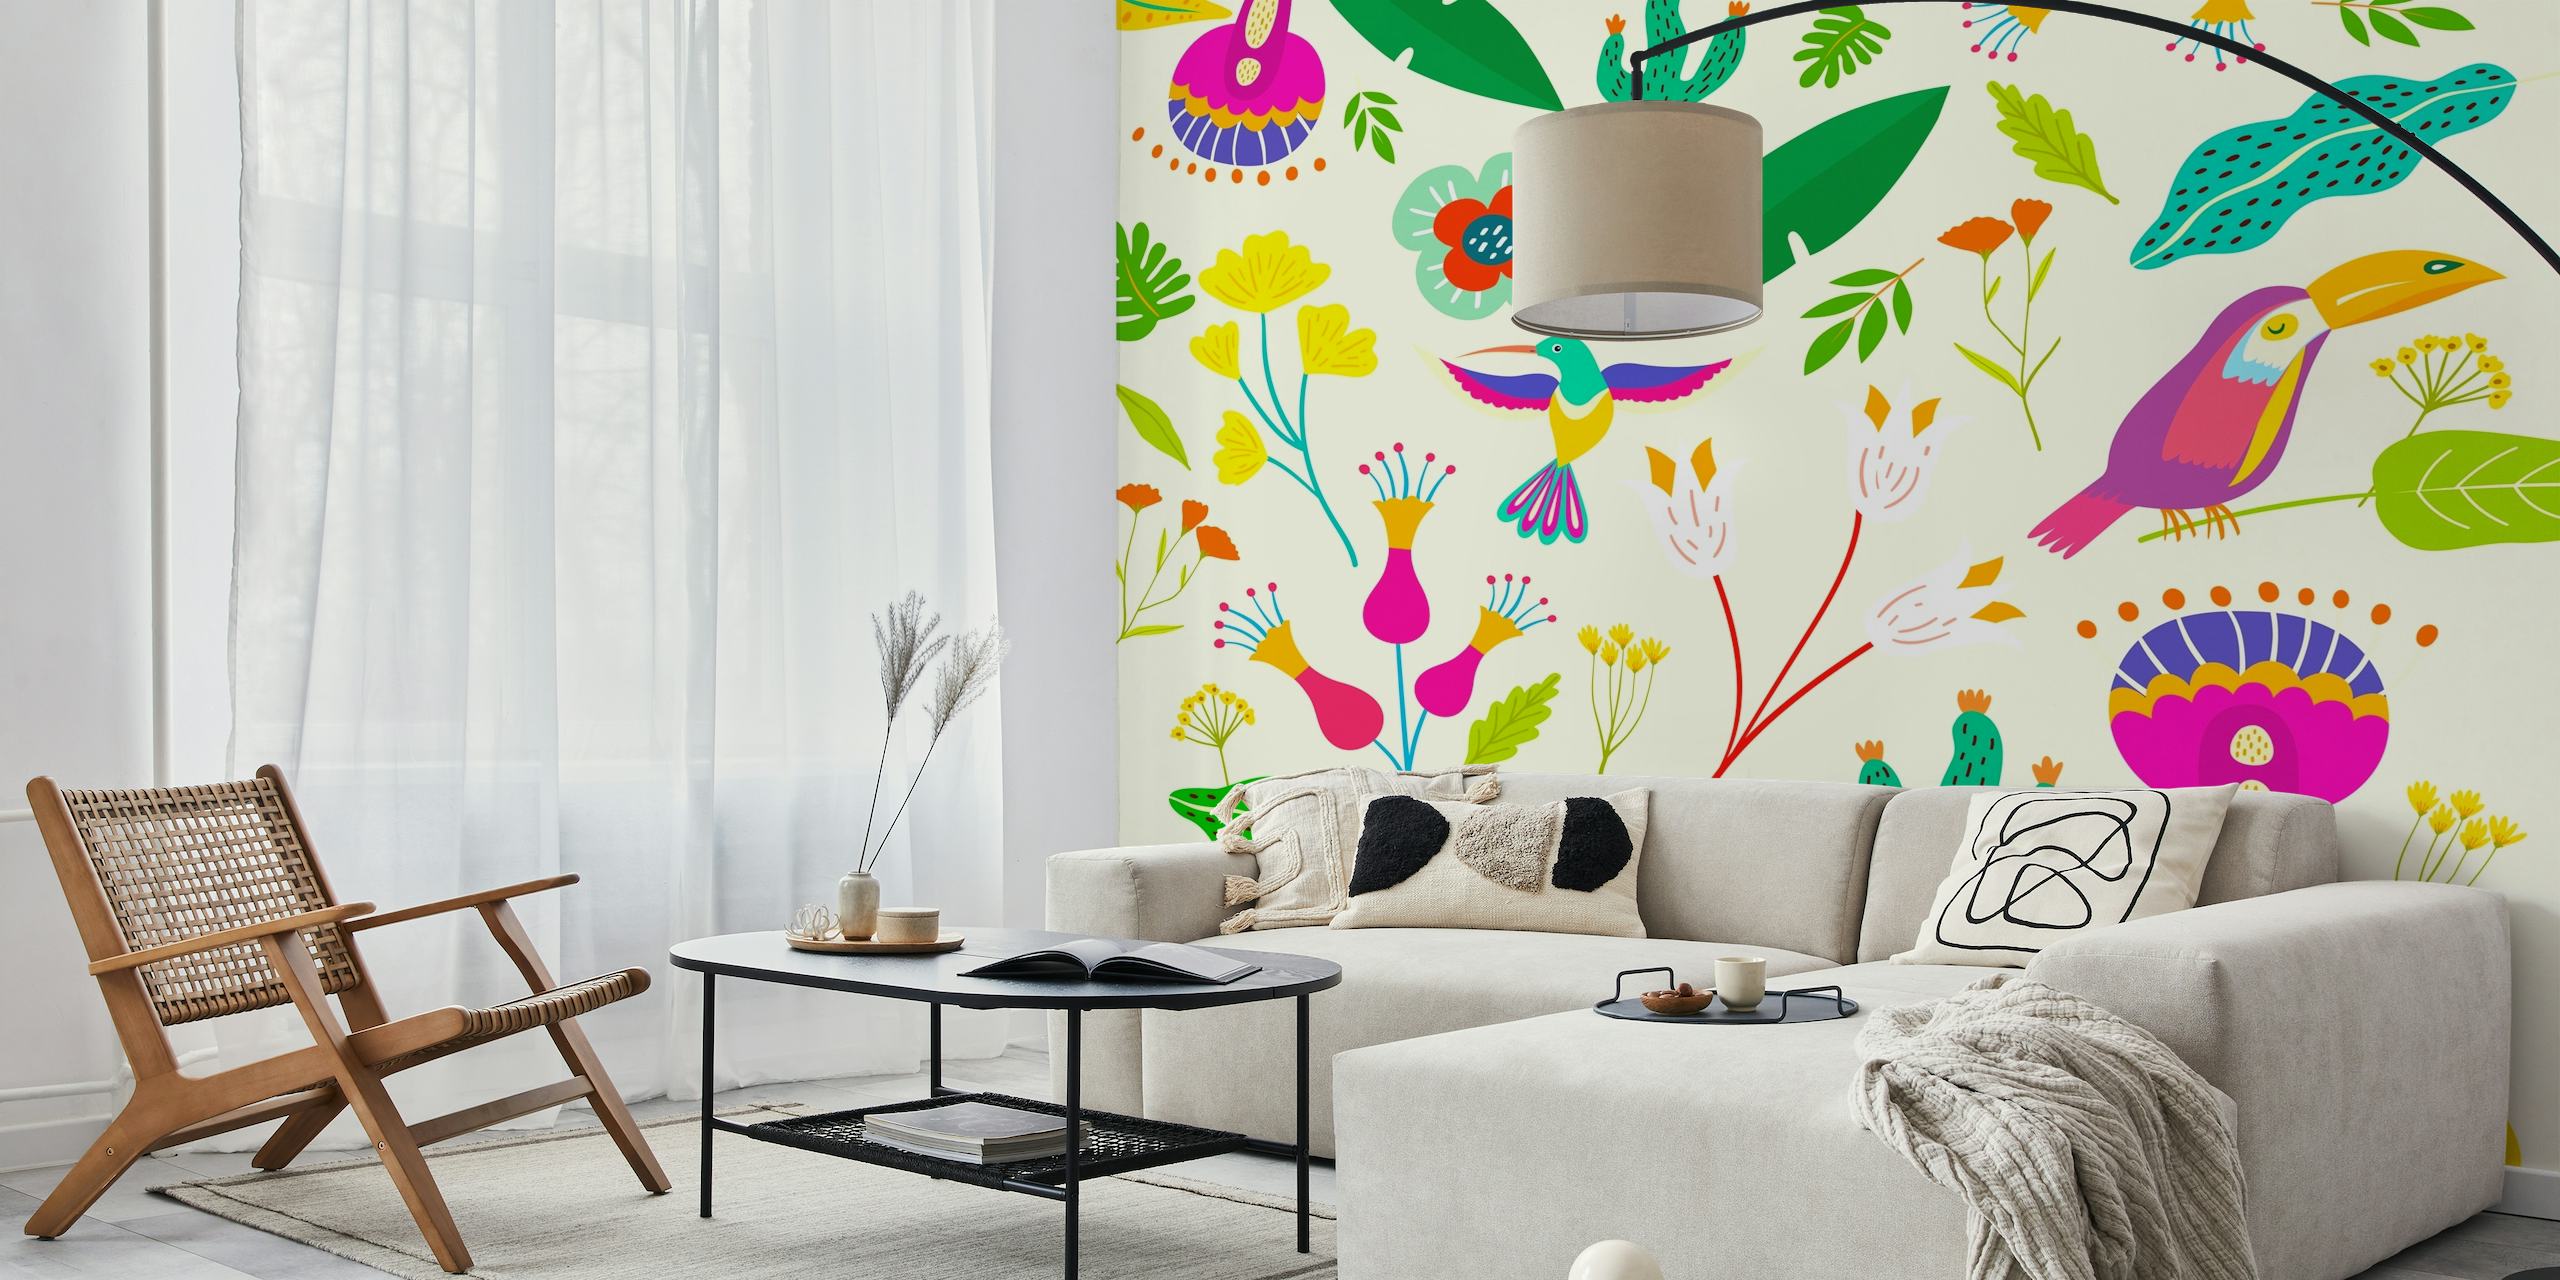 Frida Tropical Clean wall mural with stylized birds and tropical plants